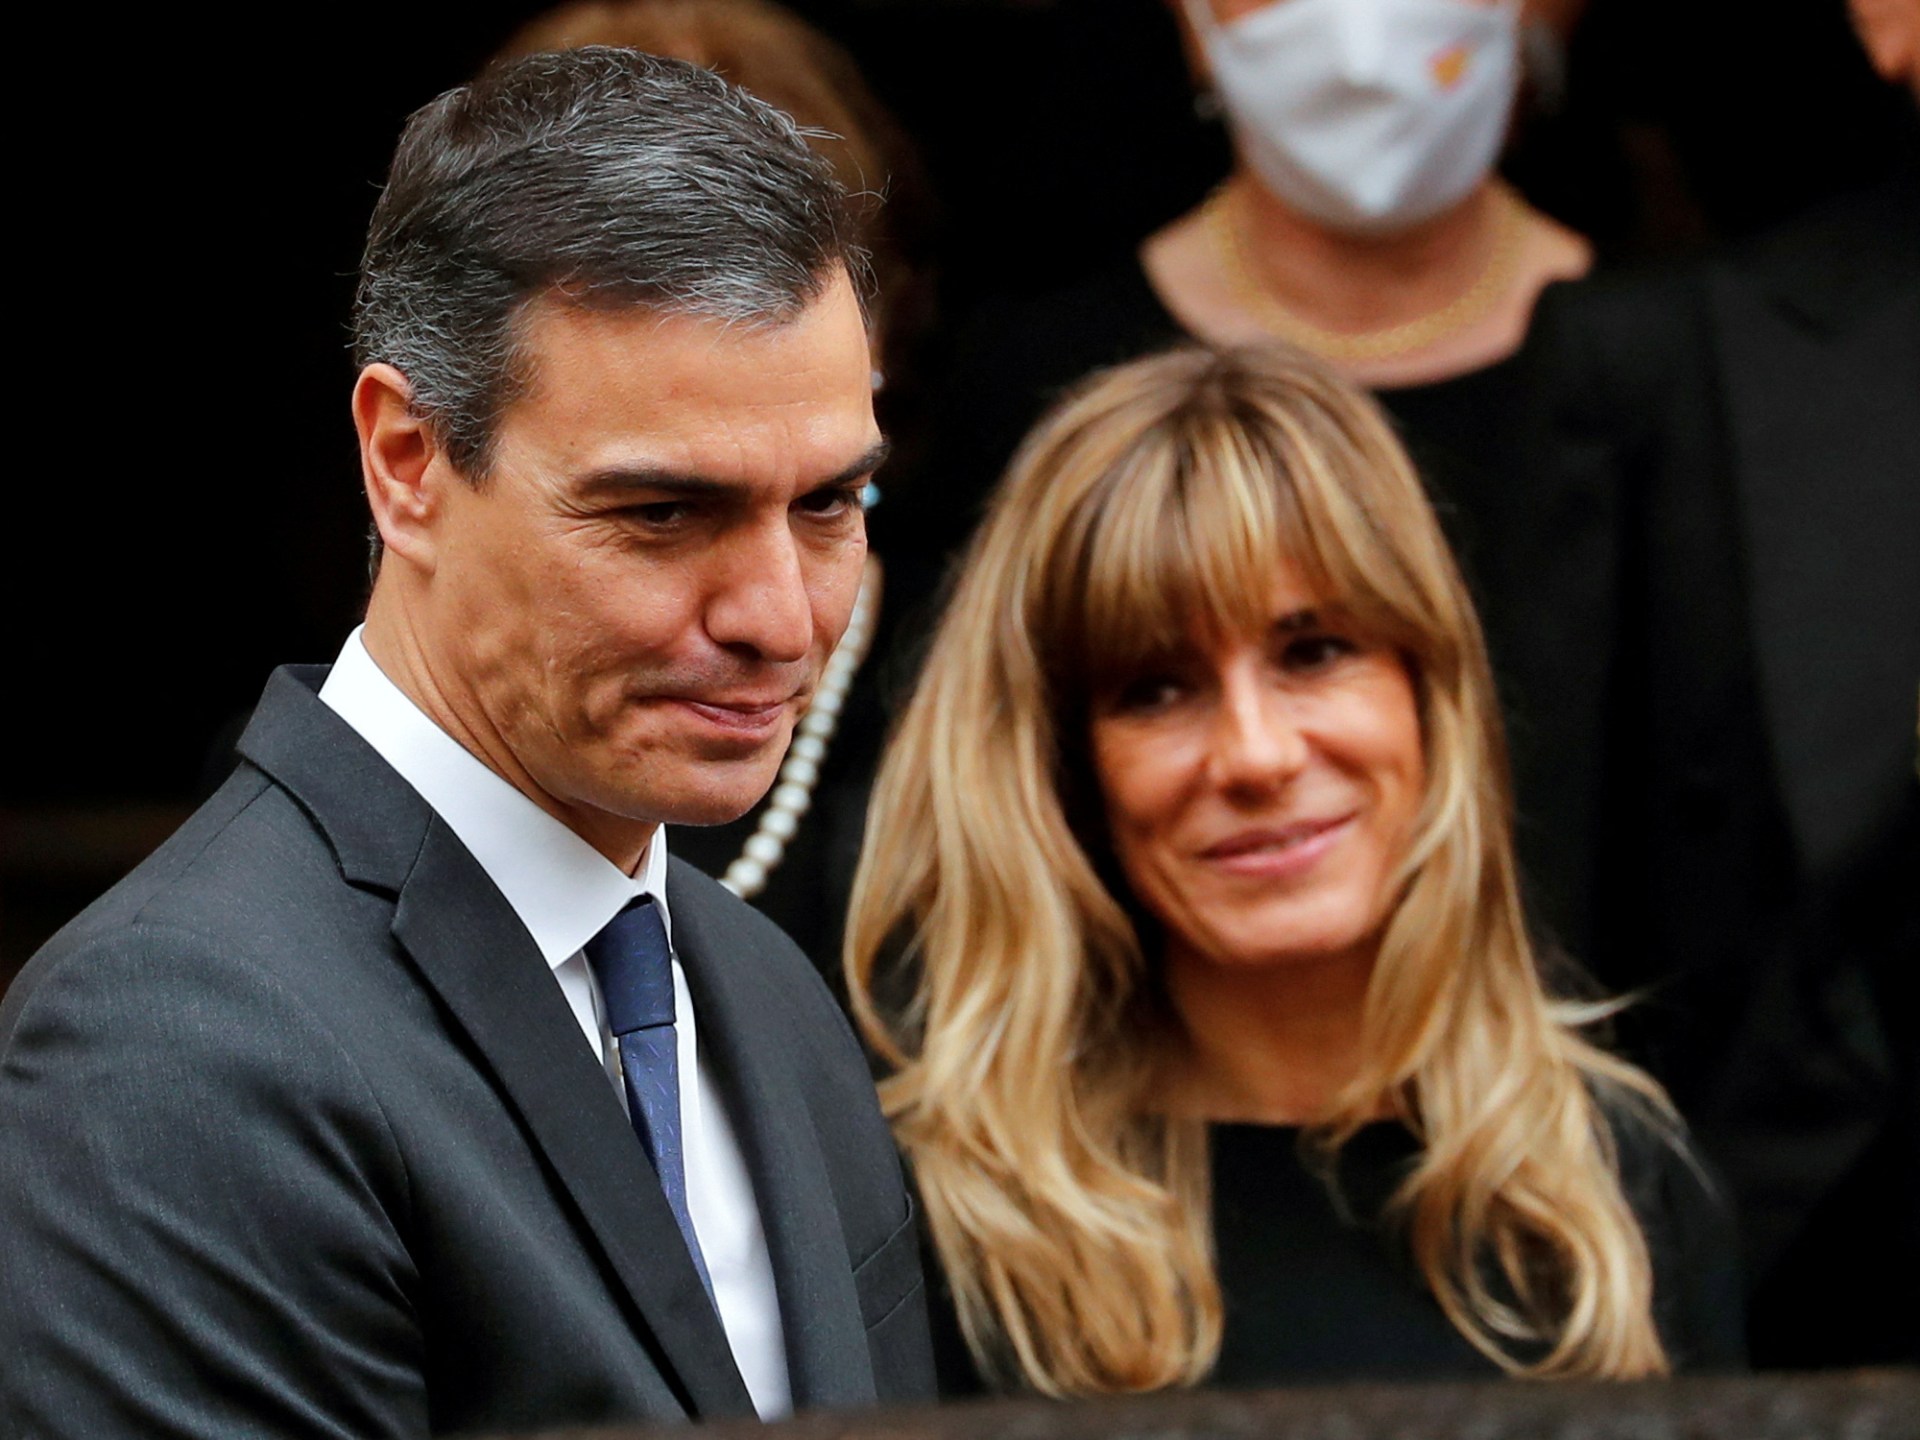 Spain’s prime minister halts public duties after wife accused of corruption